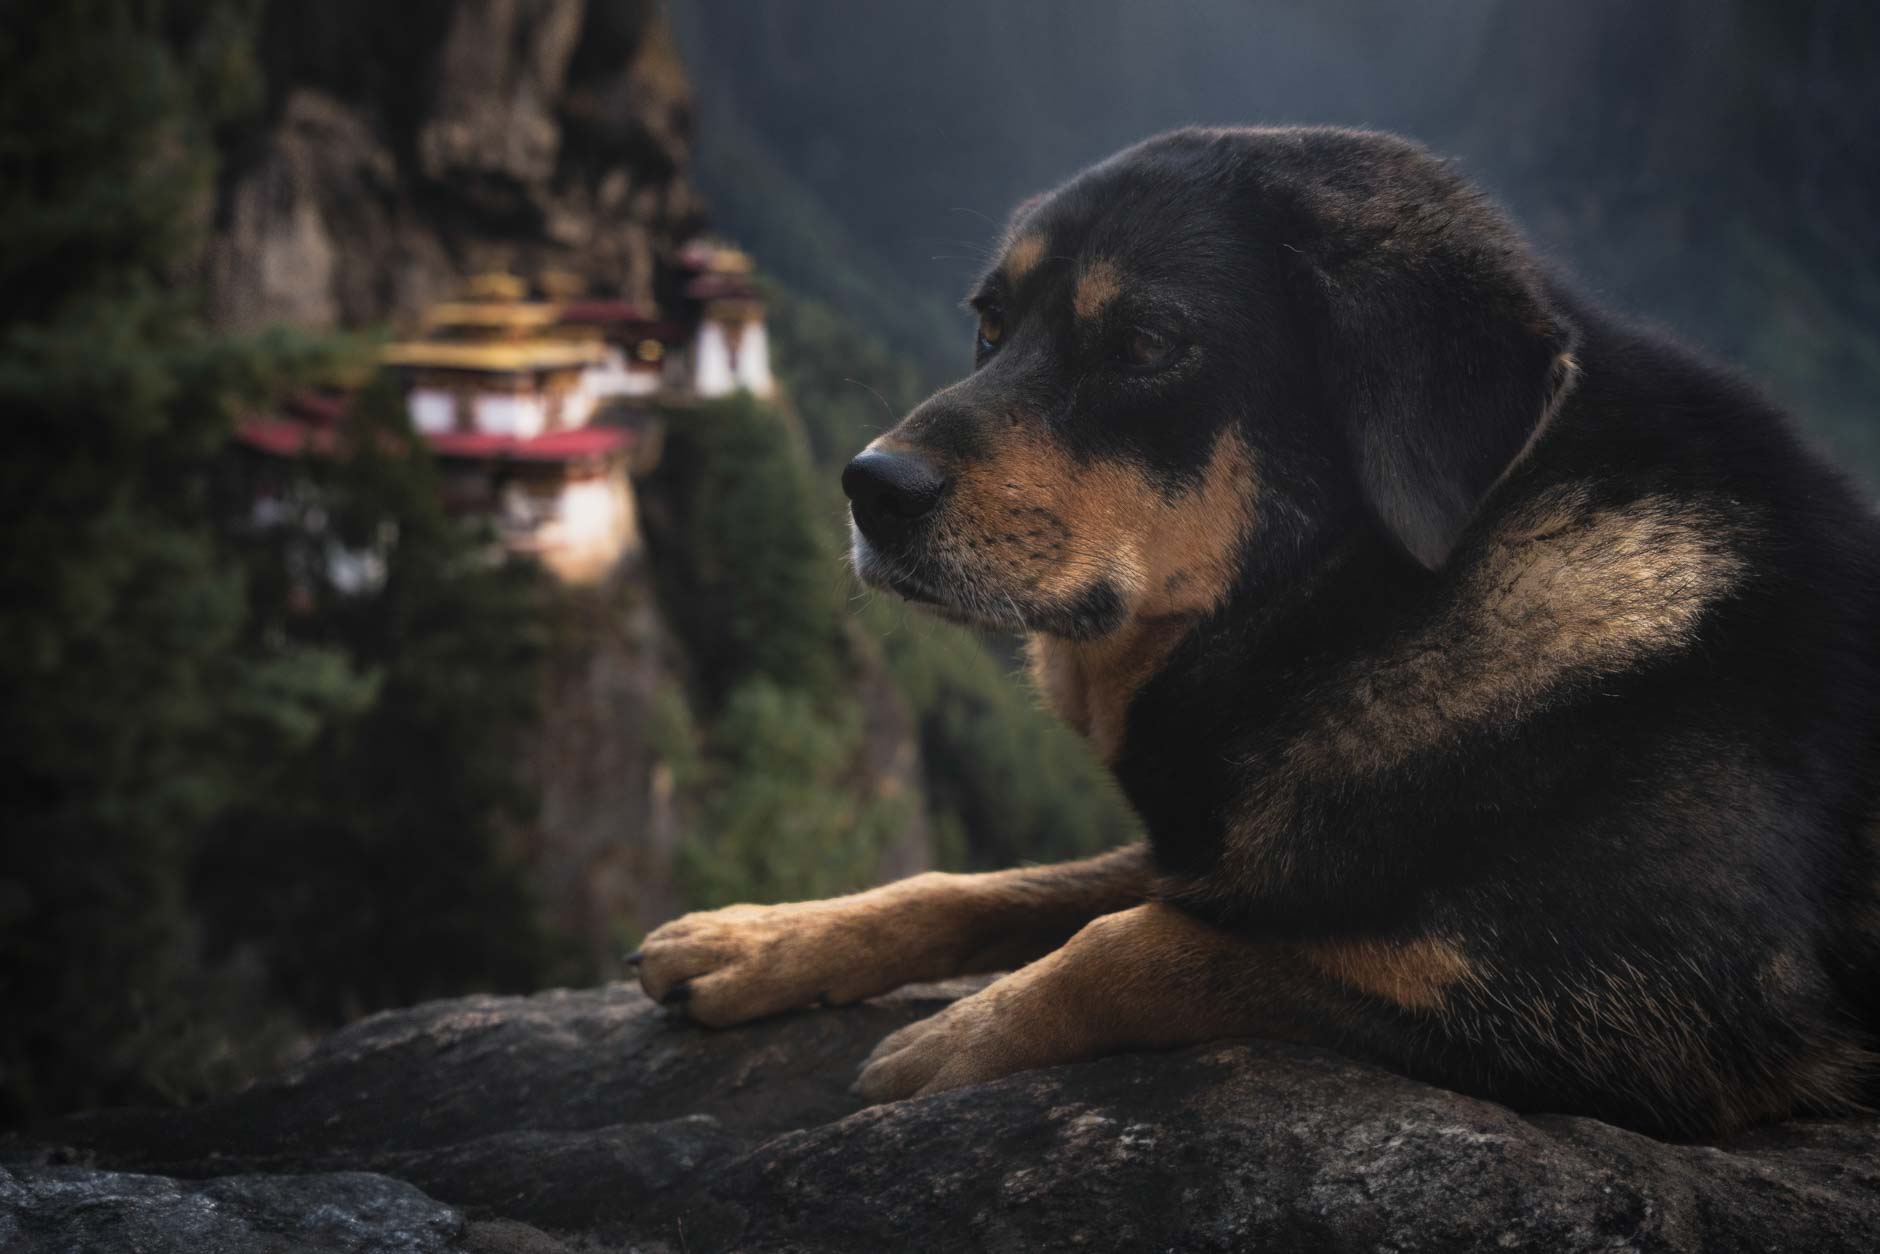 A dog sits at Tigers Nest temple in Bhutan